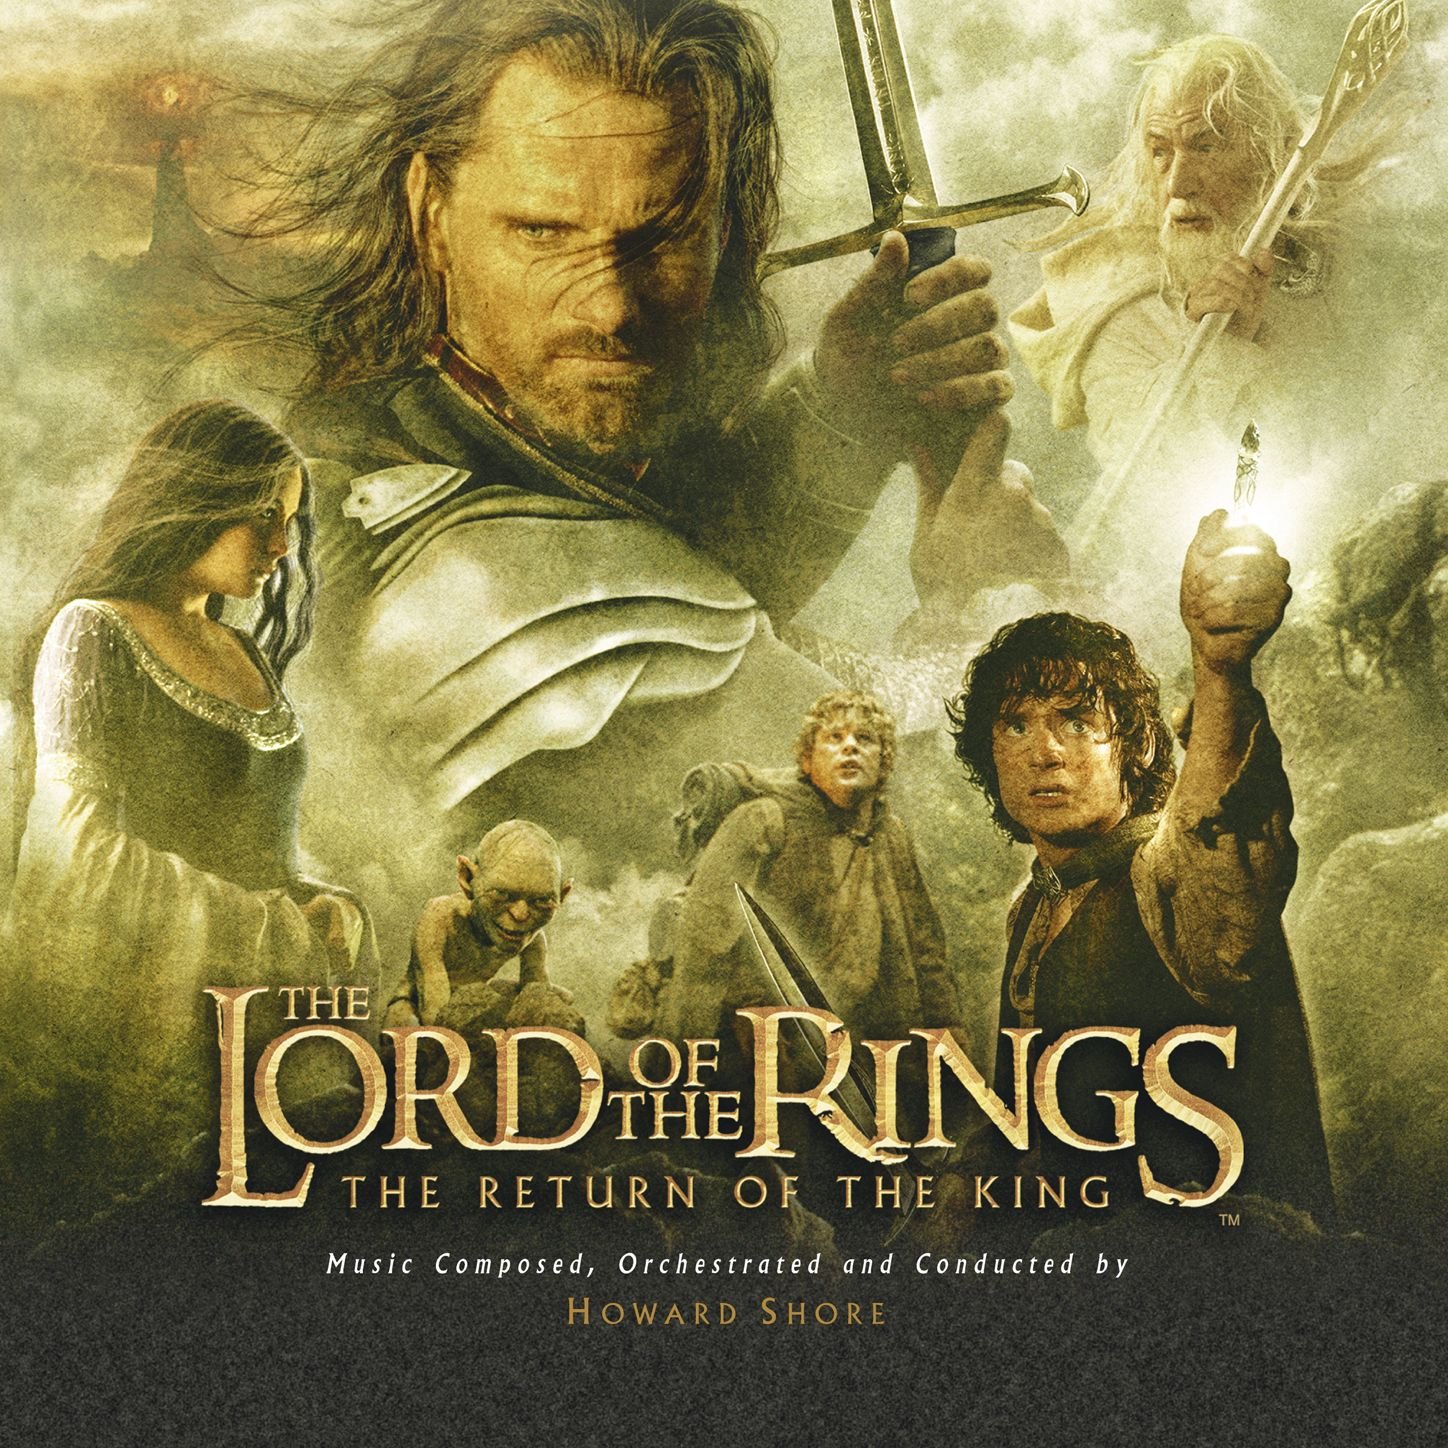 The Lord of the Rings: The Return of the King - Original Motion Picture Soundtrack